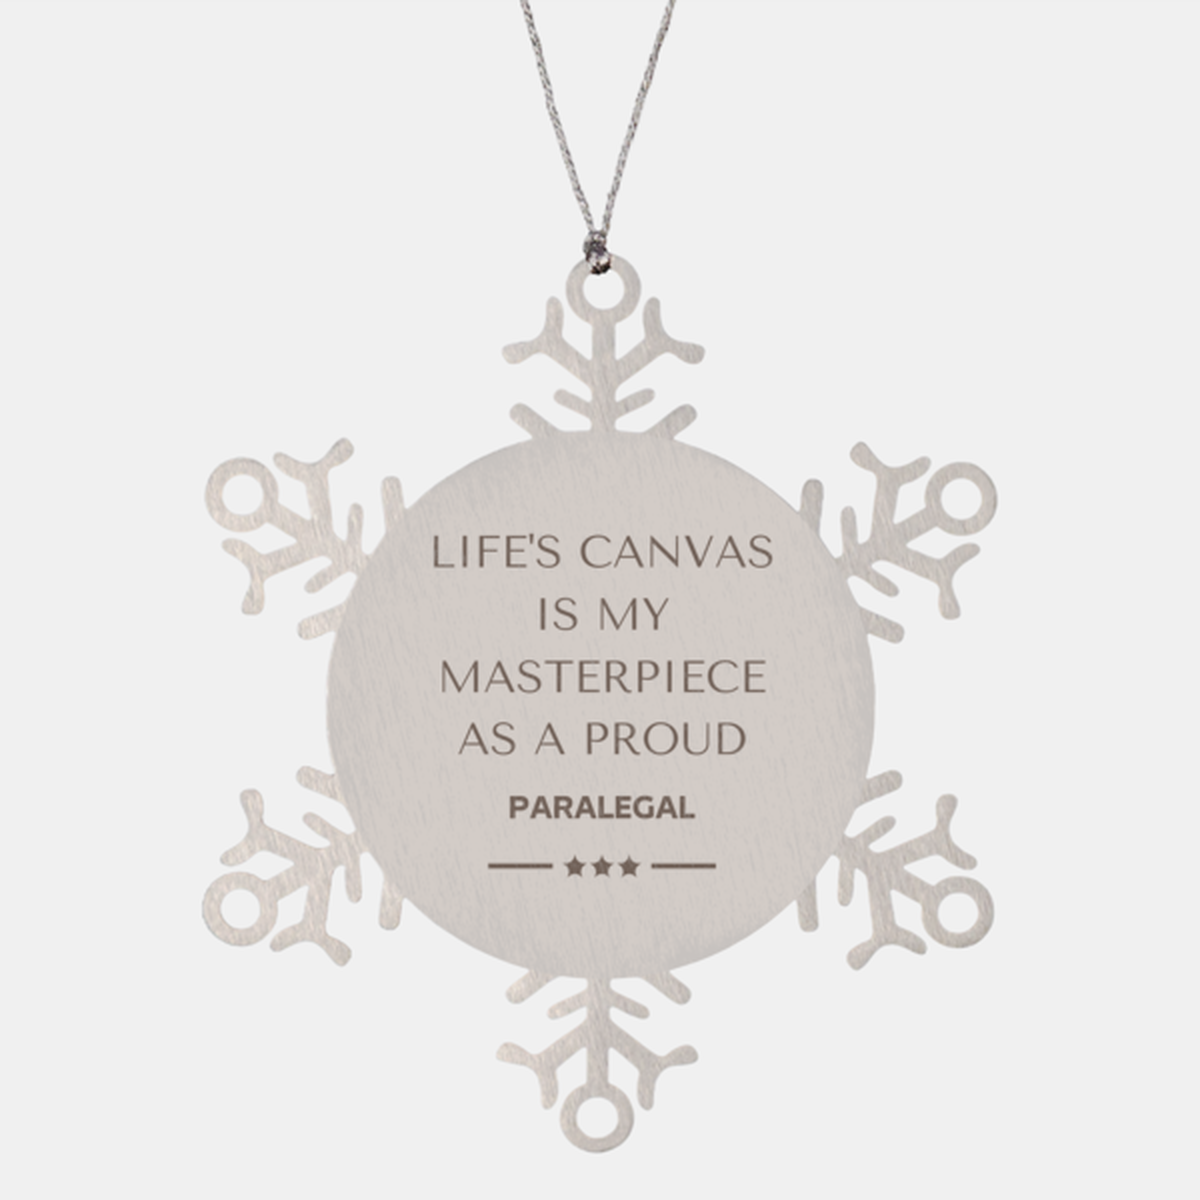 Proud Paralegal Gifts, Life's canvas is my masterpiece, Epic Birthday Christmas Unique Snowflake Ornament For Paralegal, Coworkers, Men, Women, Friends